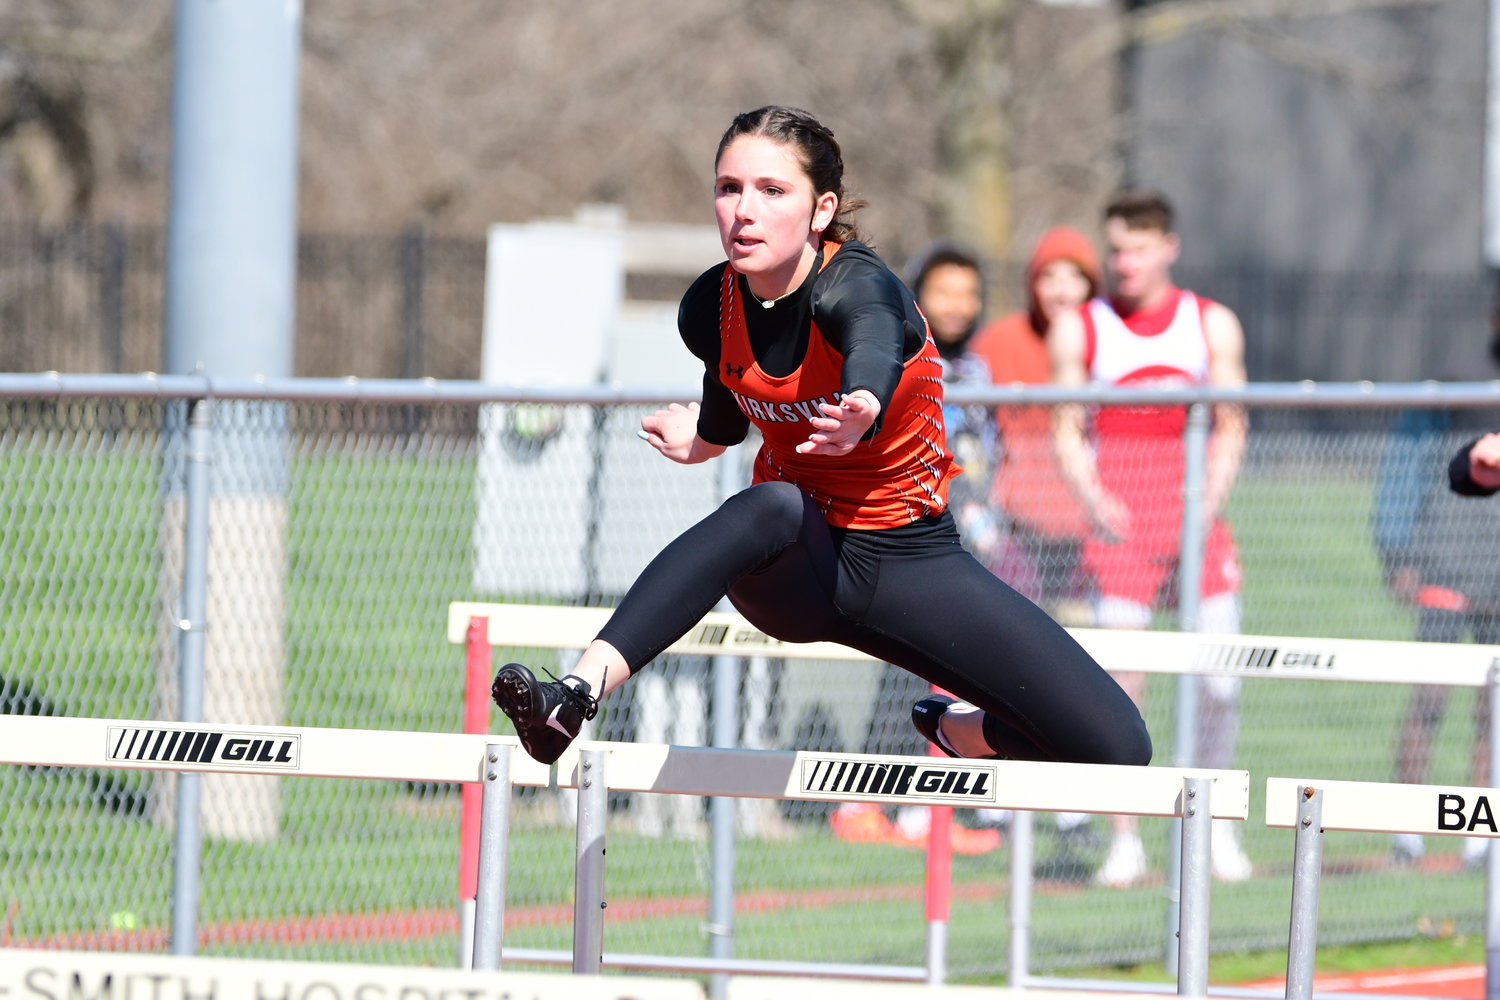 Photos from the 2022 edition of the Tiger Invitational track meet, held in Kirksville on April 14.